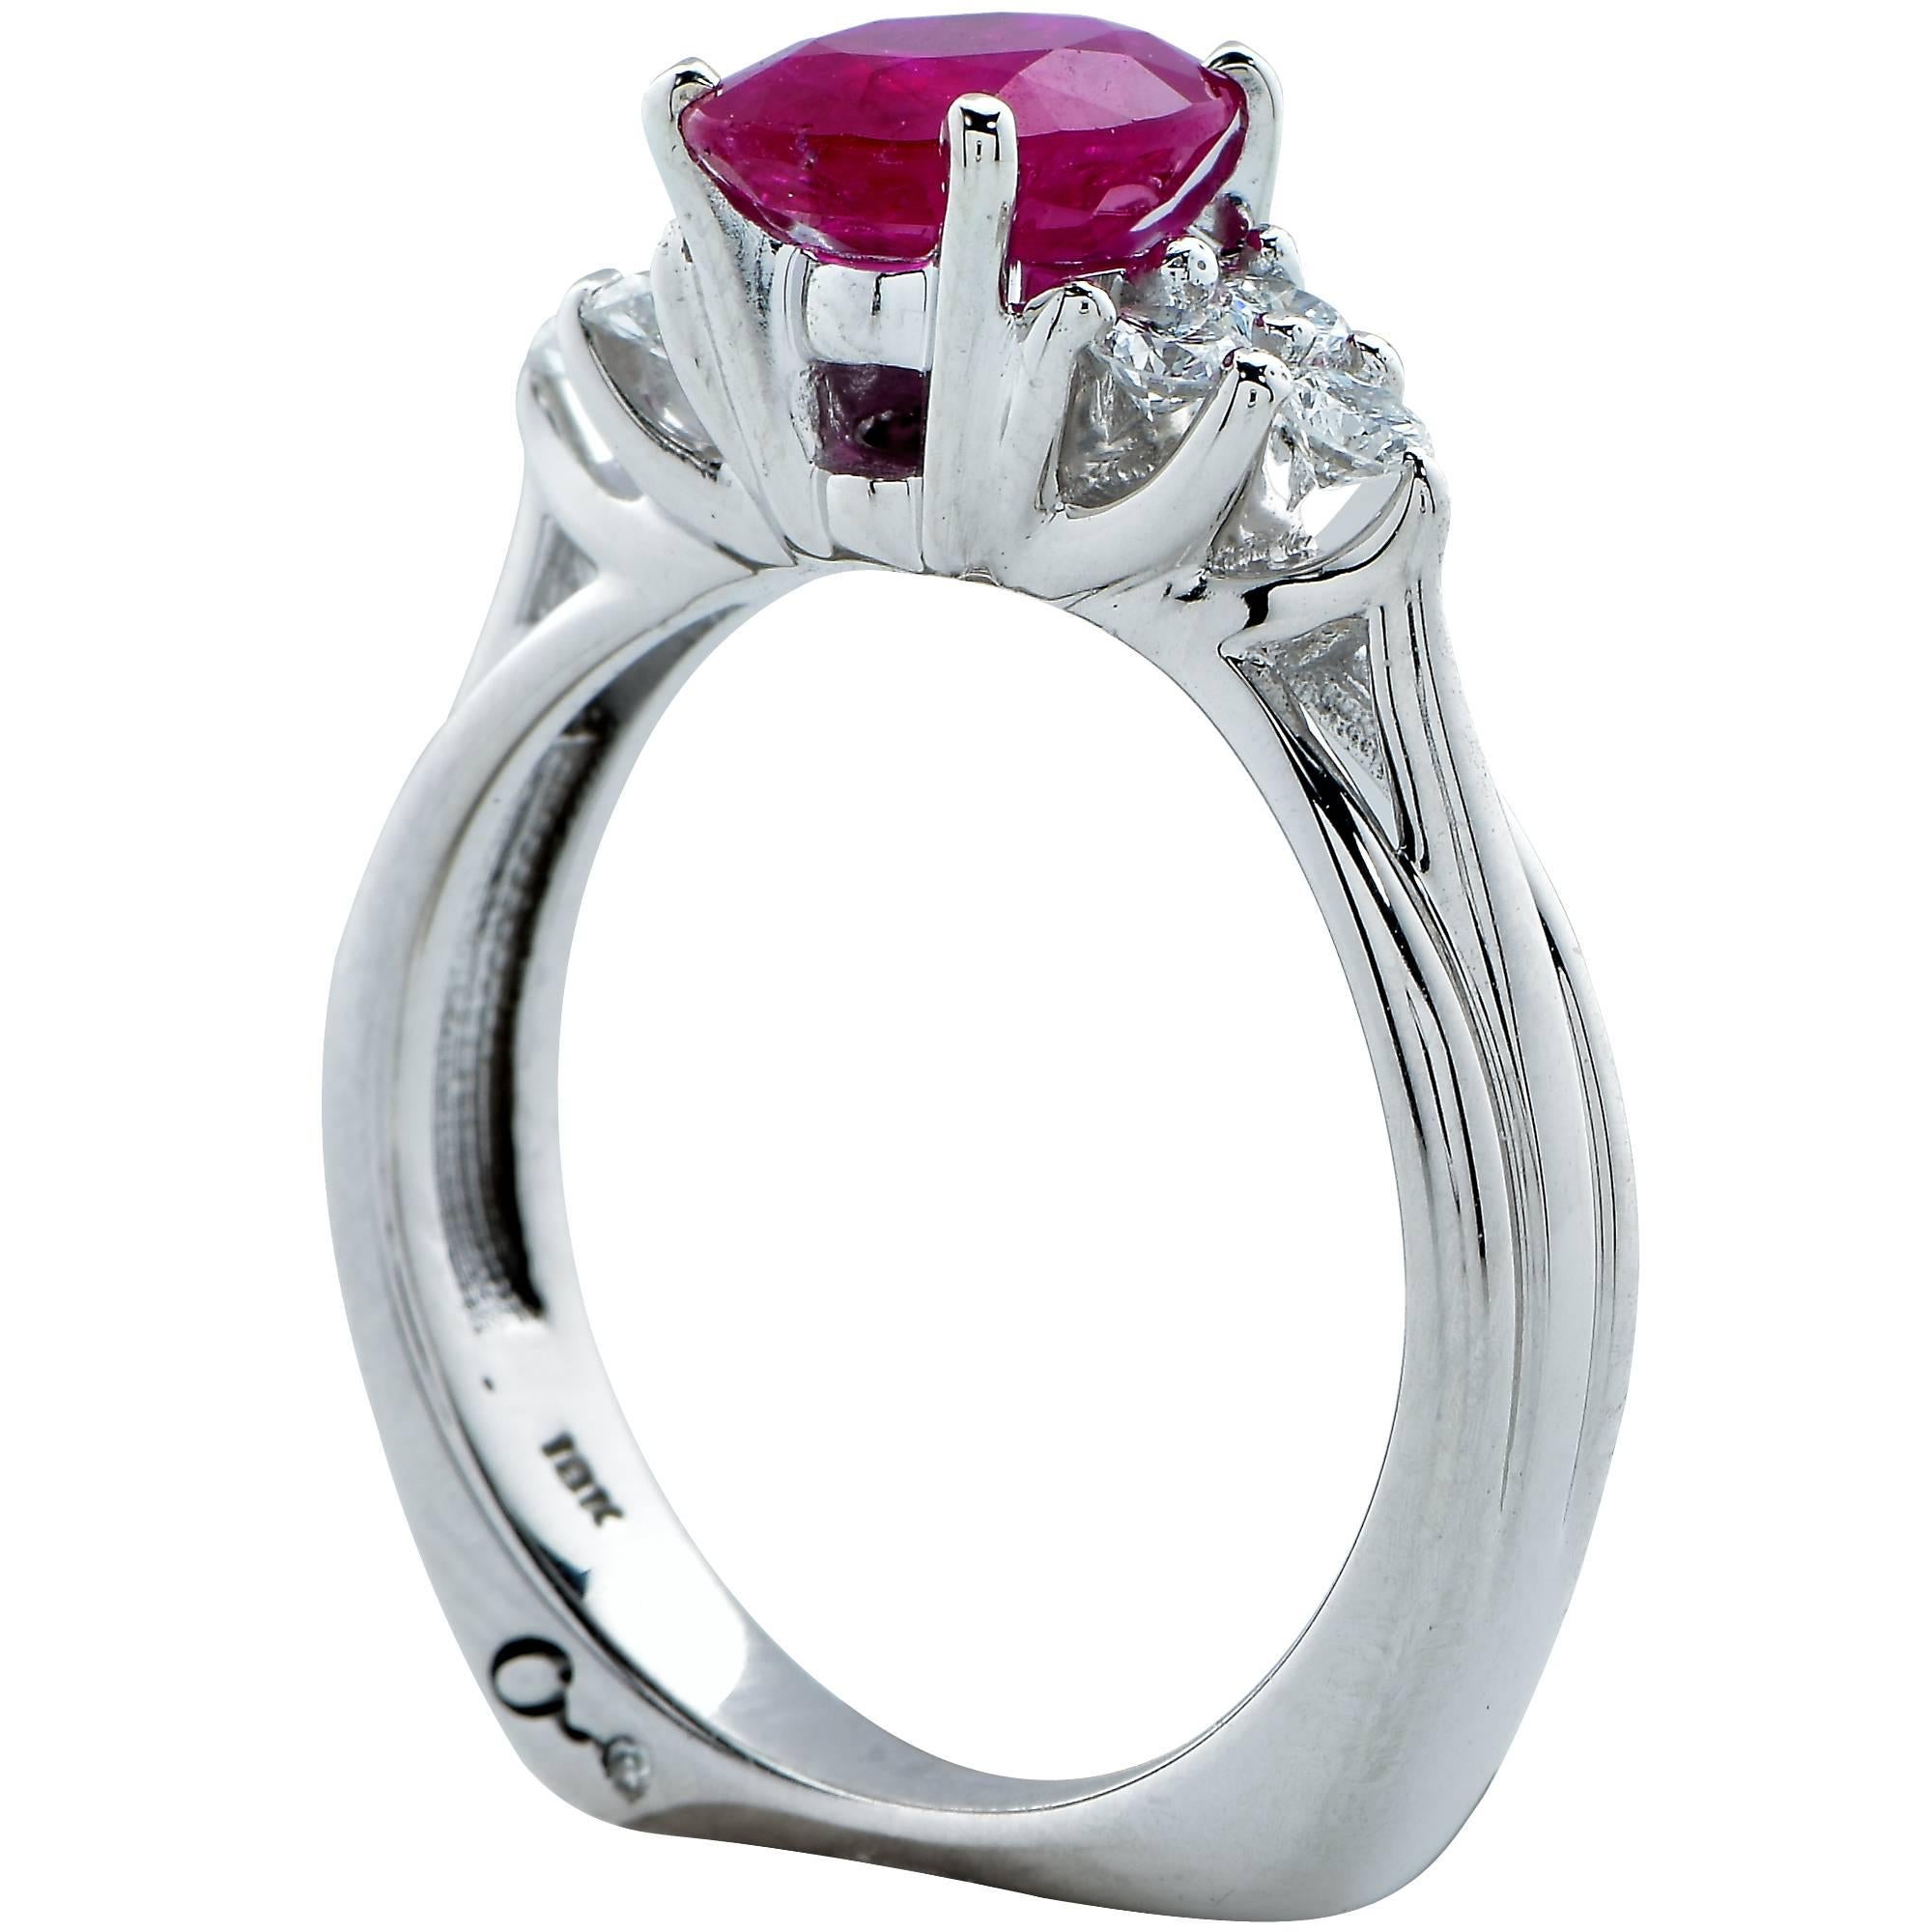 This handmade 18k white gold engagement ring features a beautiful GIA graded 1.57ct heated ruby and is accented by 6 round brilliant cut diamonds which are G color VS clarity. The diamonds weigh approximately .40cts total.

The ring is a size 5.5